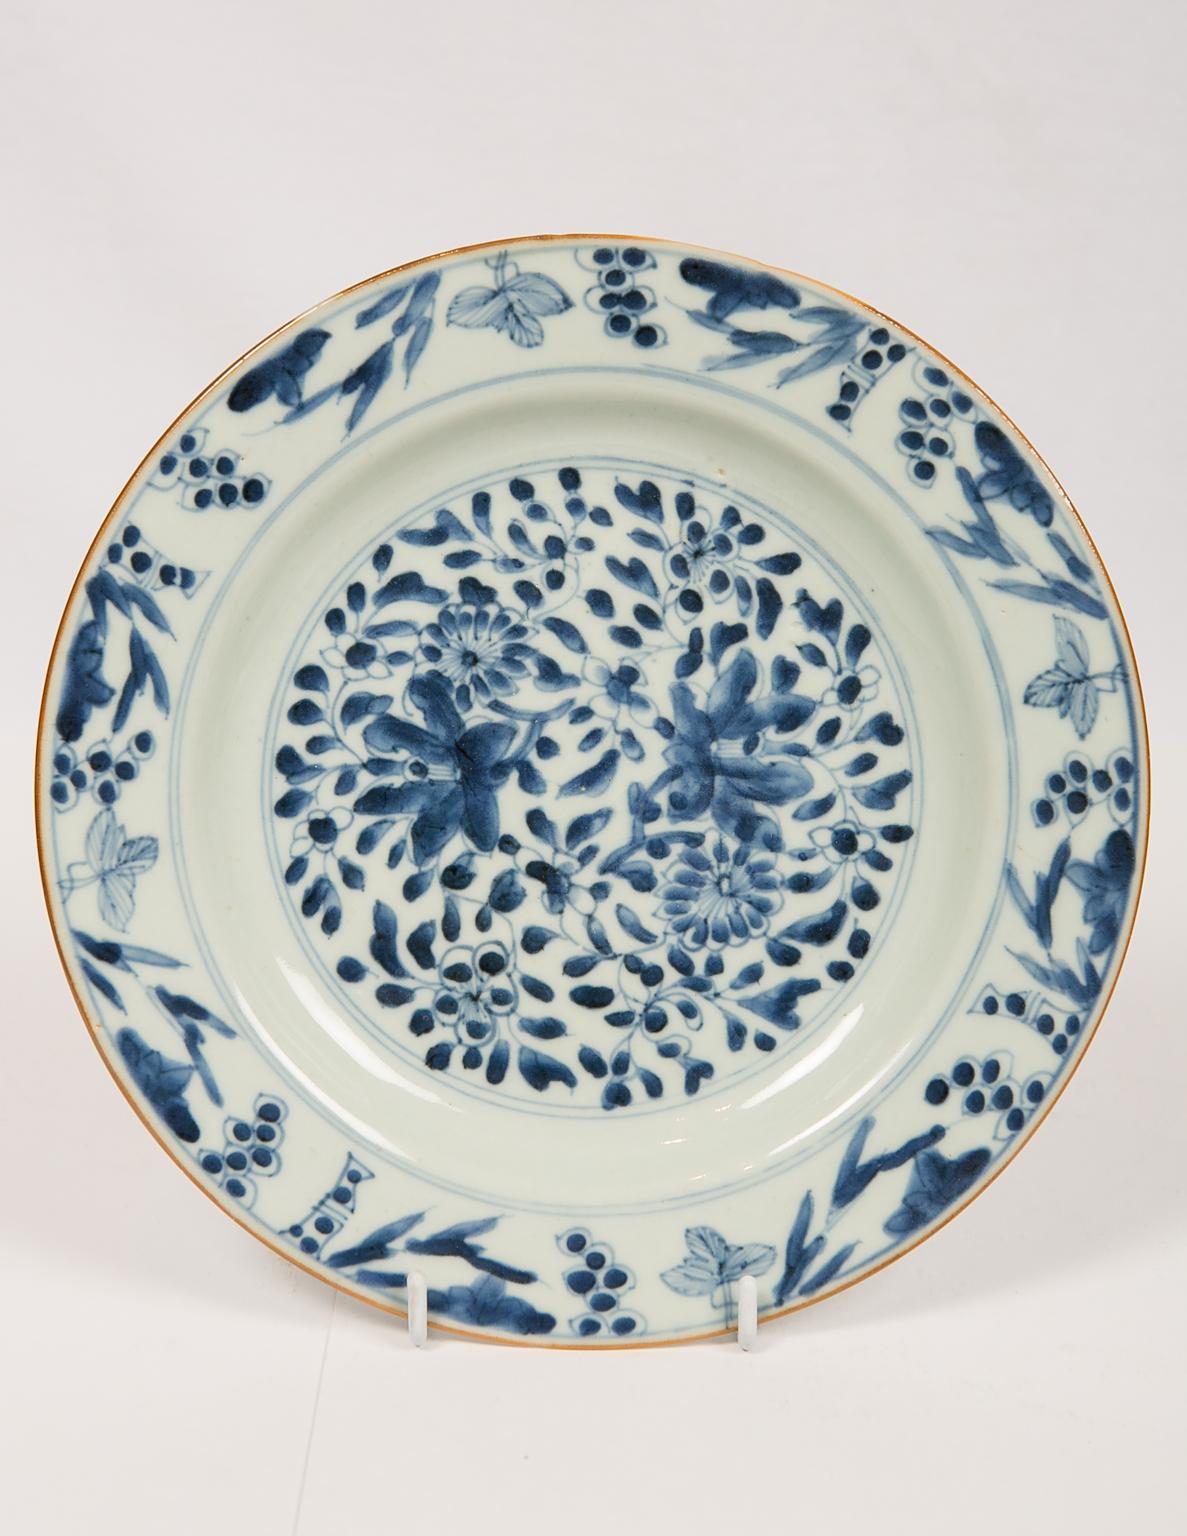 A group of eight beautiful Chinese blue and white porcelain dishes made in the 18th century during the Qianlong Reign, circa 1770. Made for export to Europe, the plates show a variety of beautiful floral patterns, all hand painted in cobalt